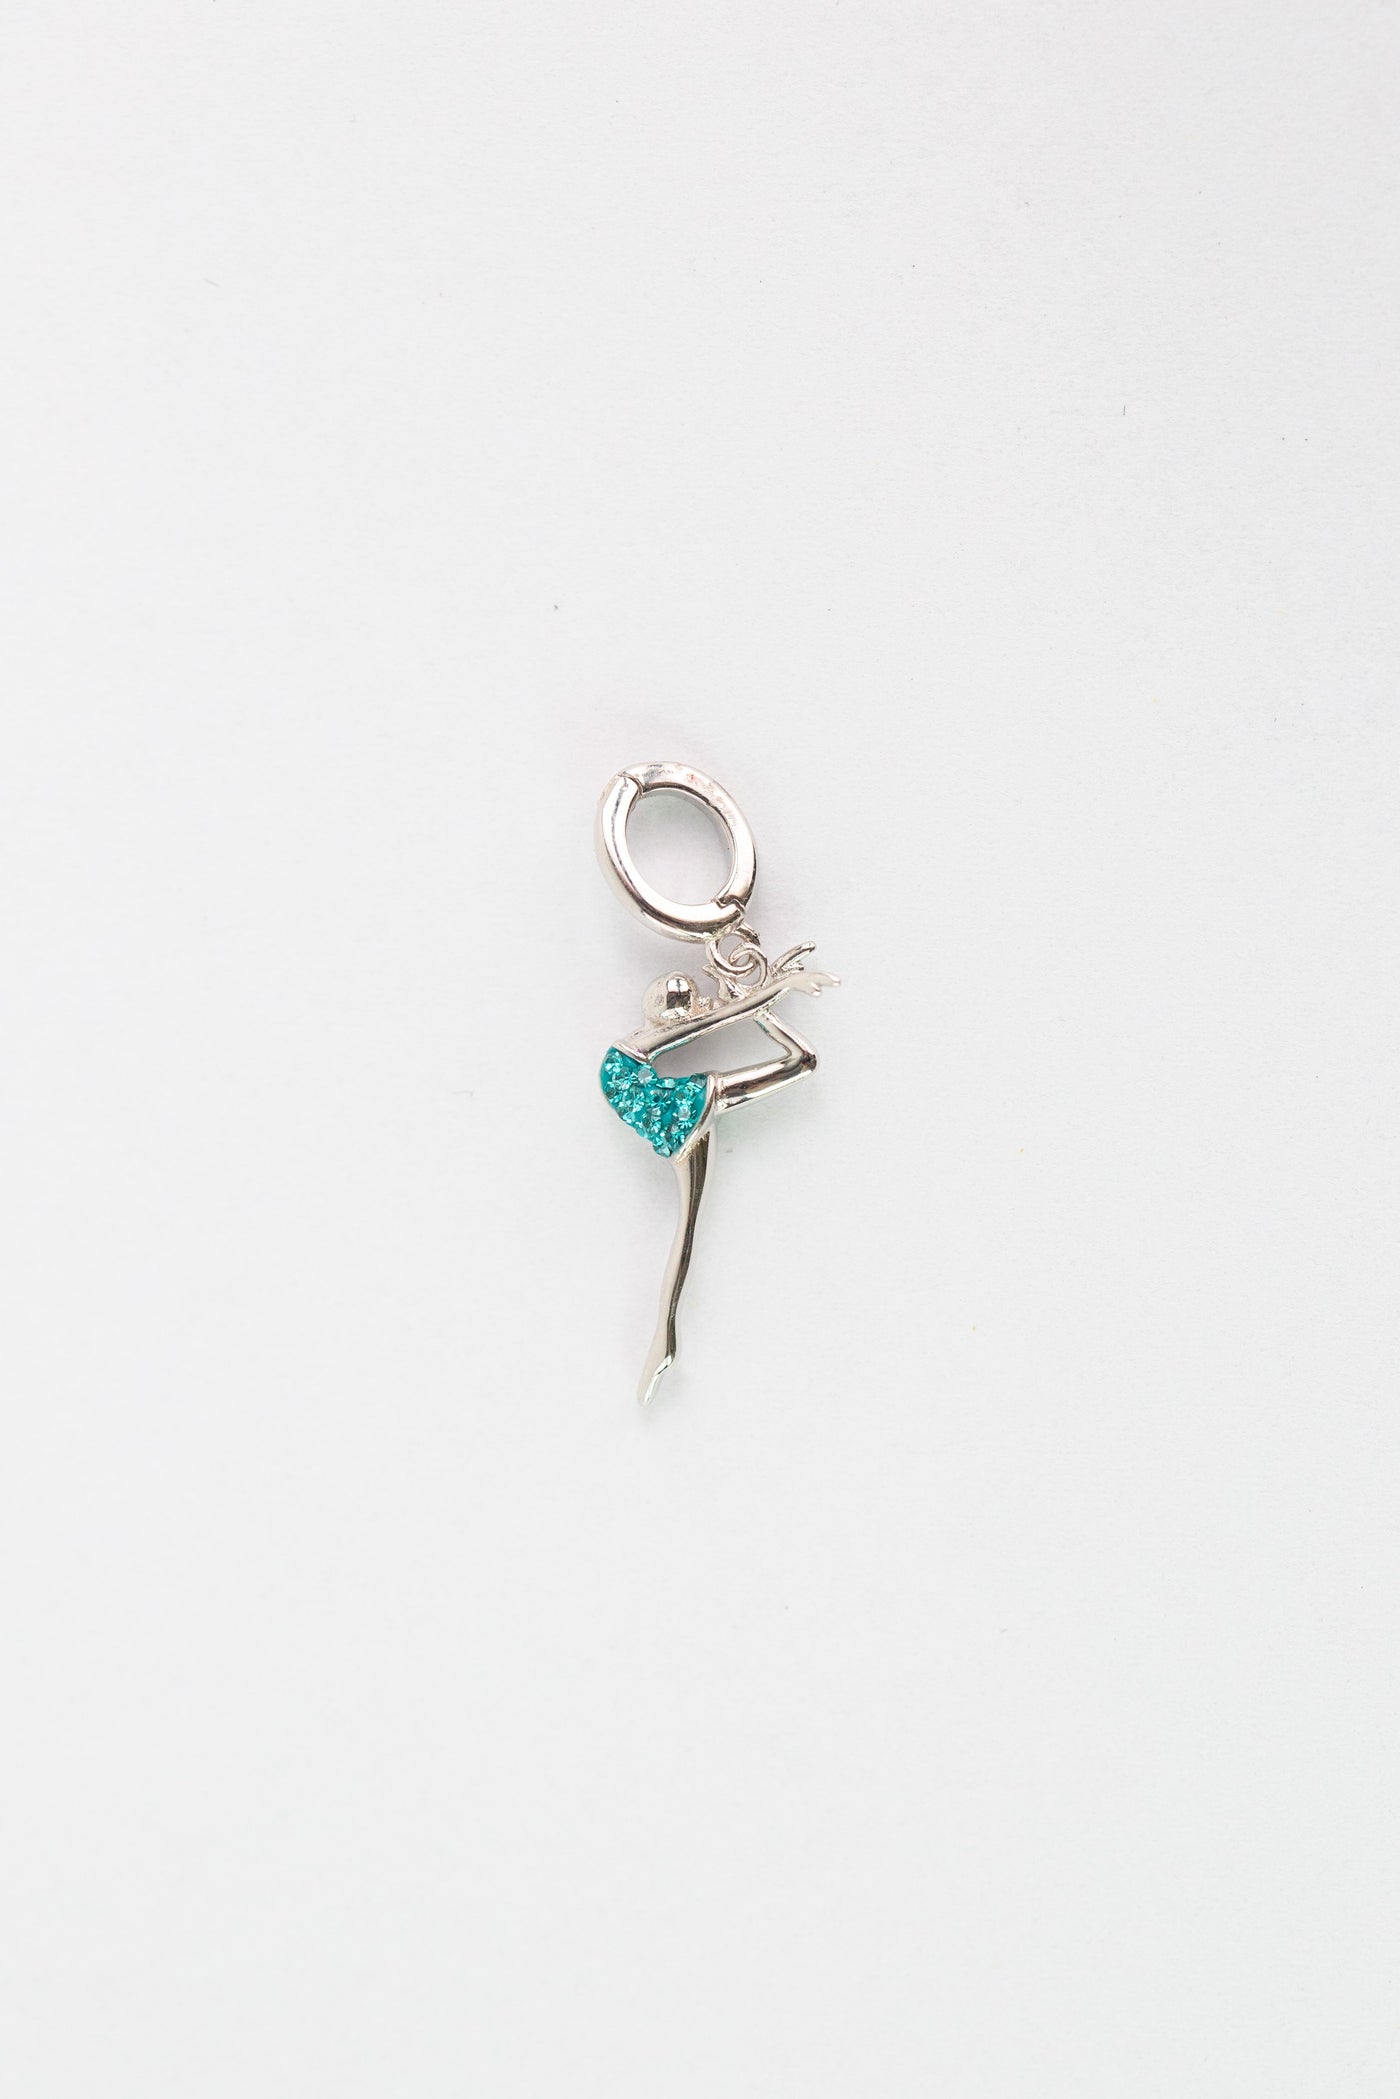 Dancer Leap in Air (In A Scorpion Kick) Crystal Sterling Silver Charm in Blue Zircon | Annie and Sisters